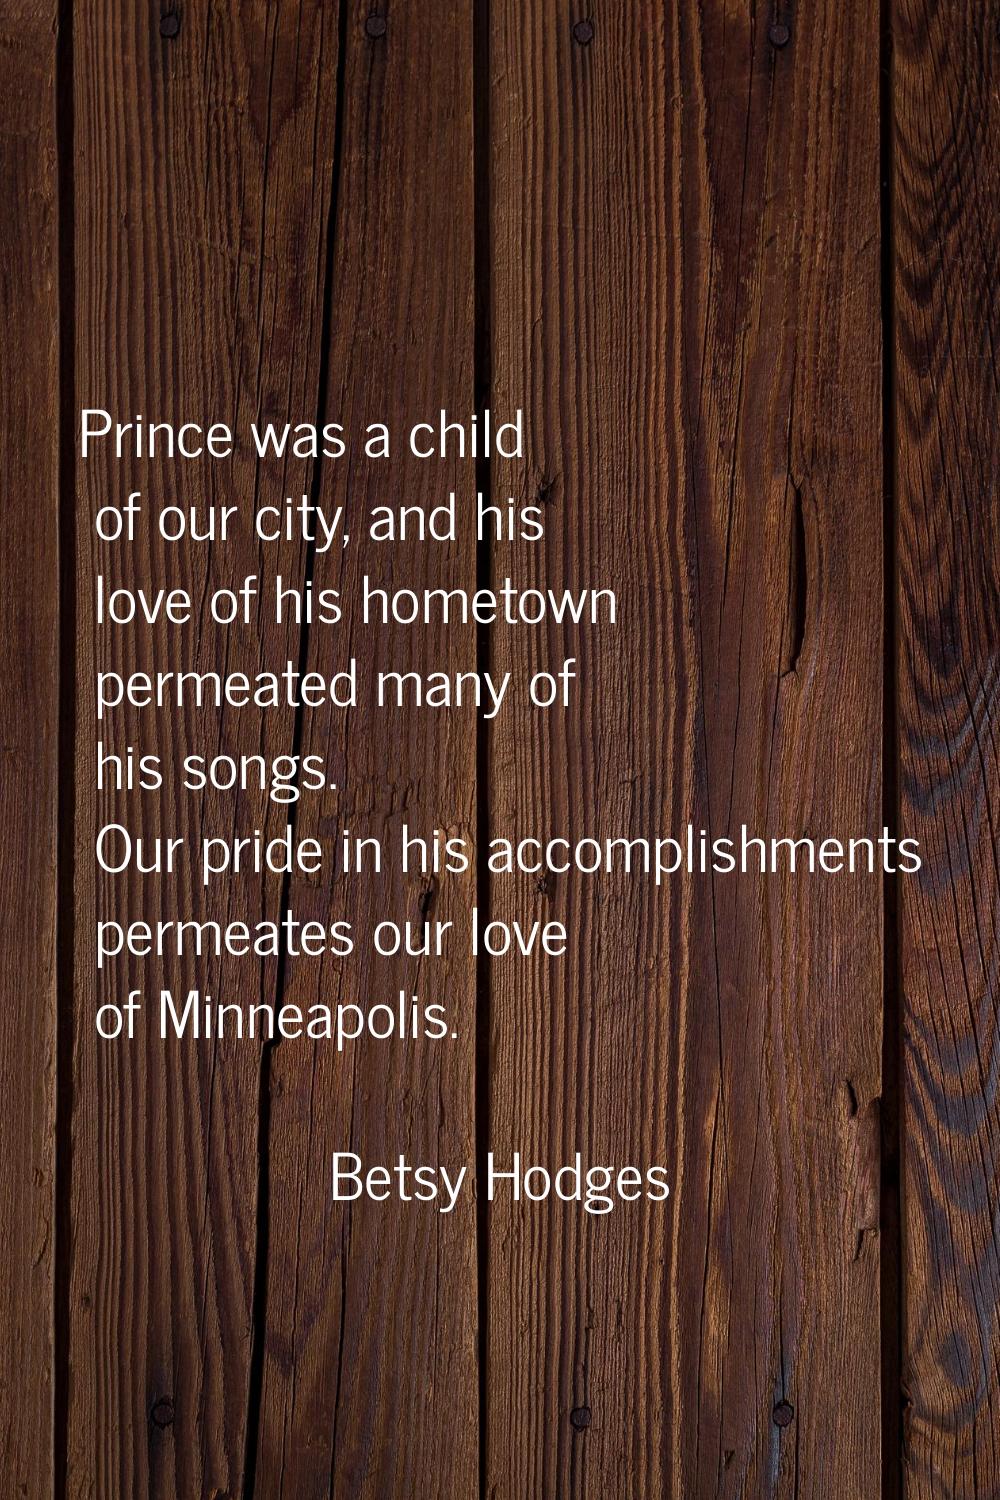 Prince was a child of our city, and his love of his hometown permeated many of his songs. Our pride